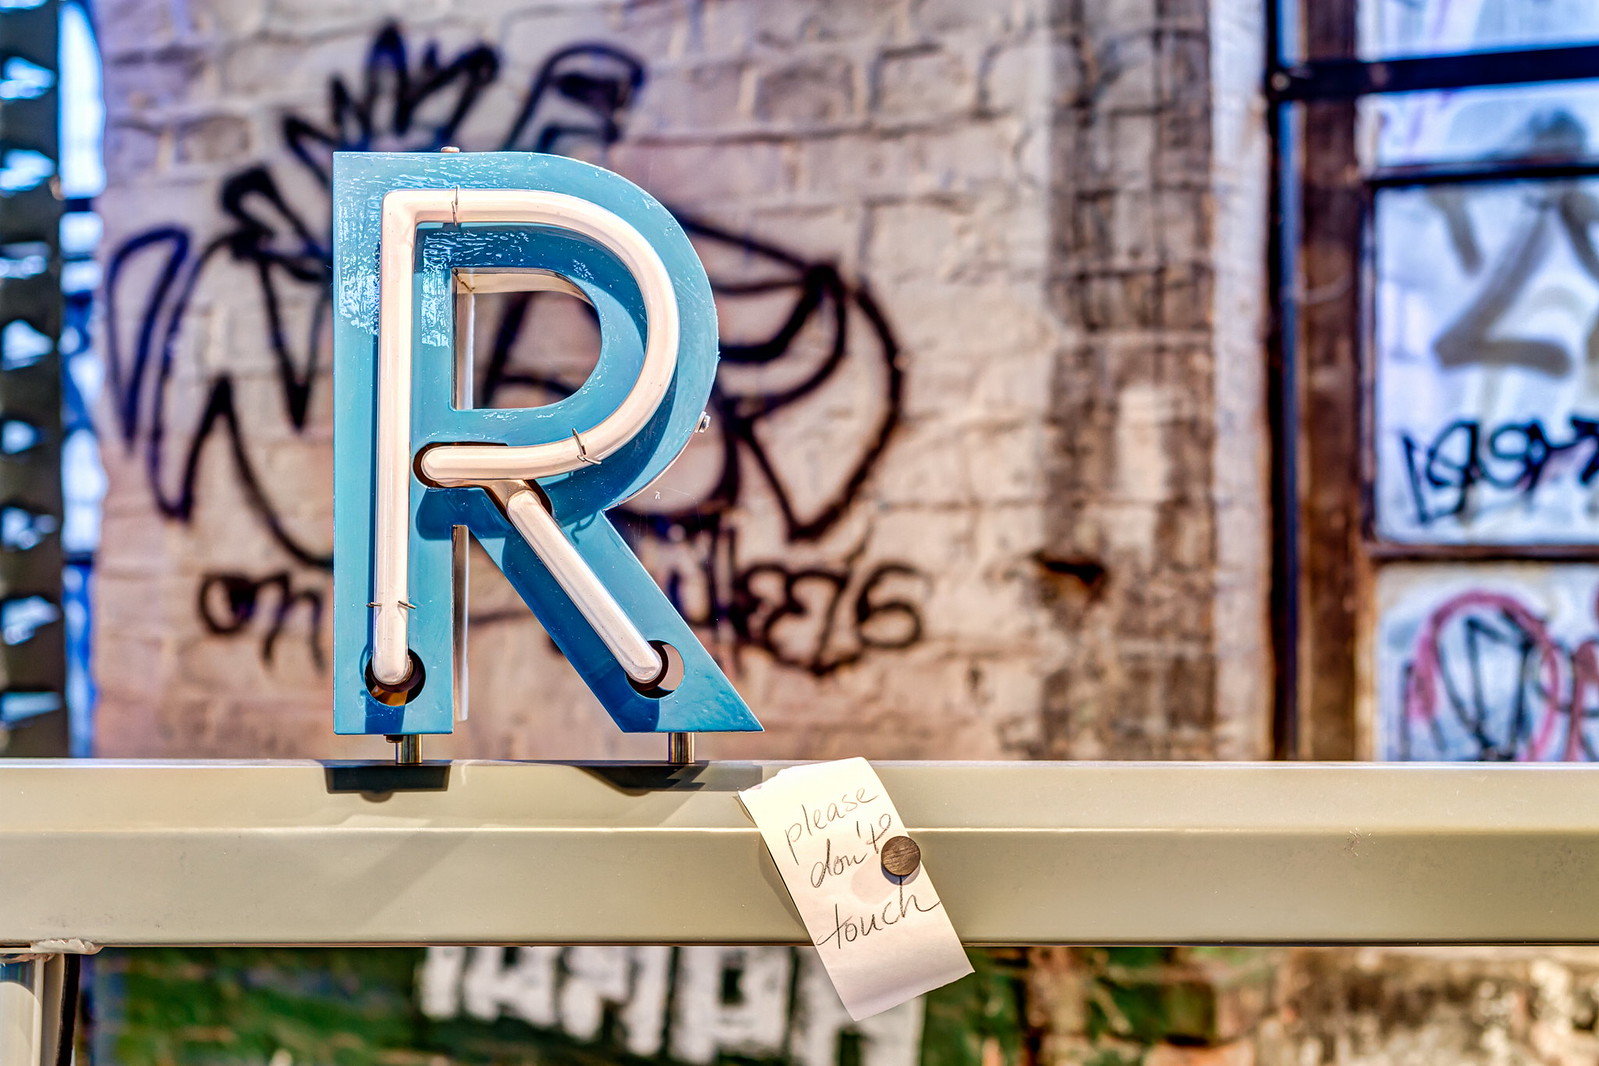 R is the letter